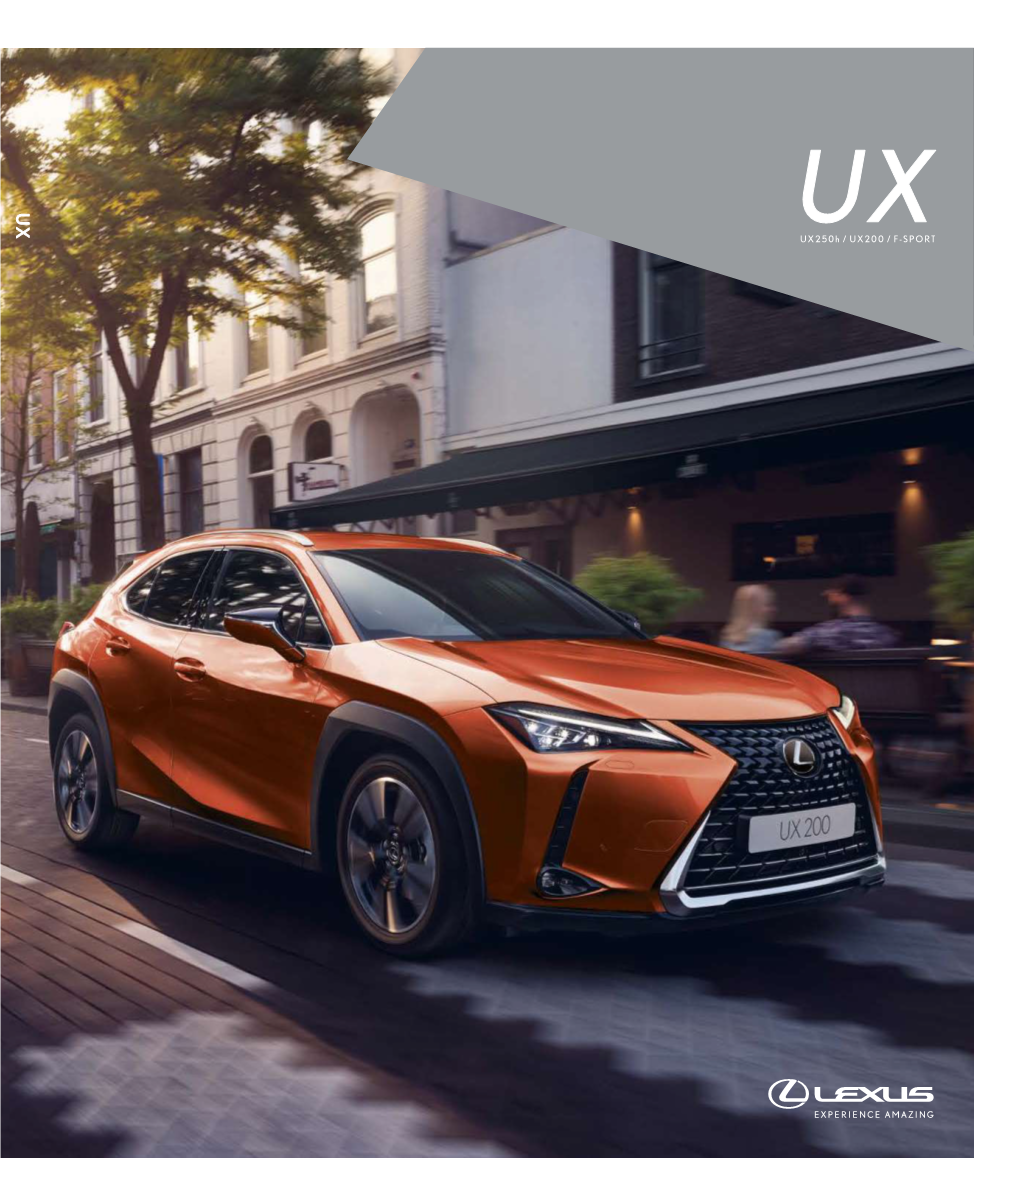 Ux250h / UX200 / F-SPORT DISCOVER NEW HORIZONS Who Knows What the Open Road Will Bring? with So Much to Discover, Let the Lexus UX Take You There